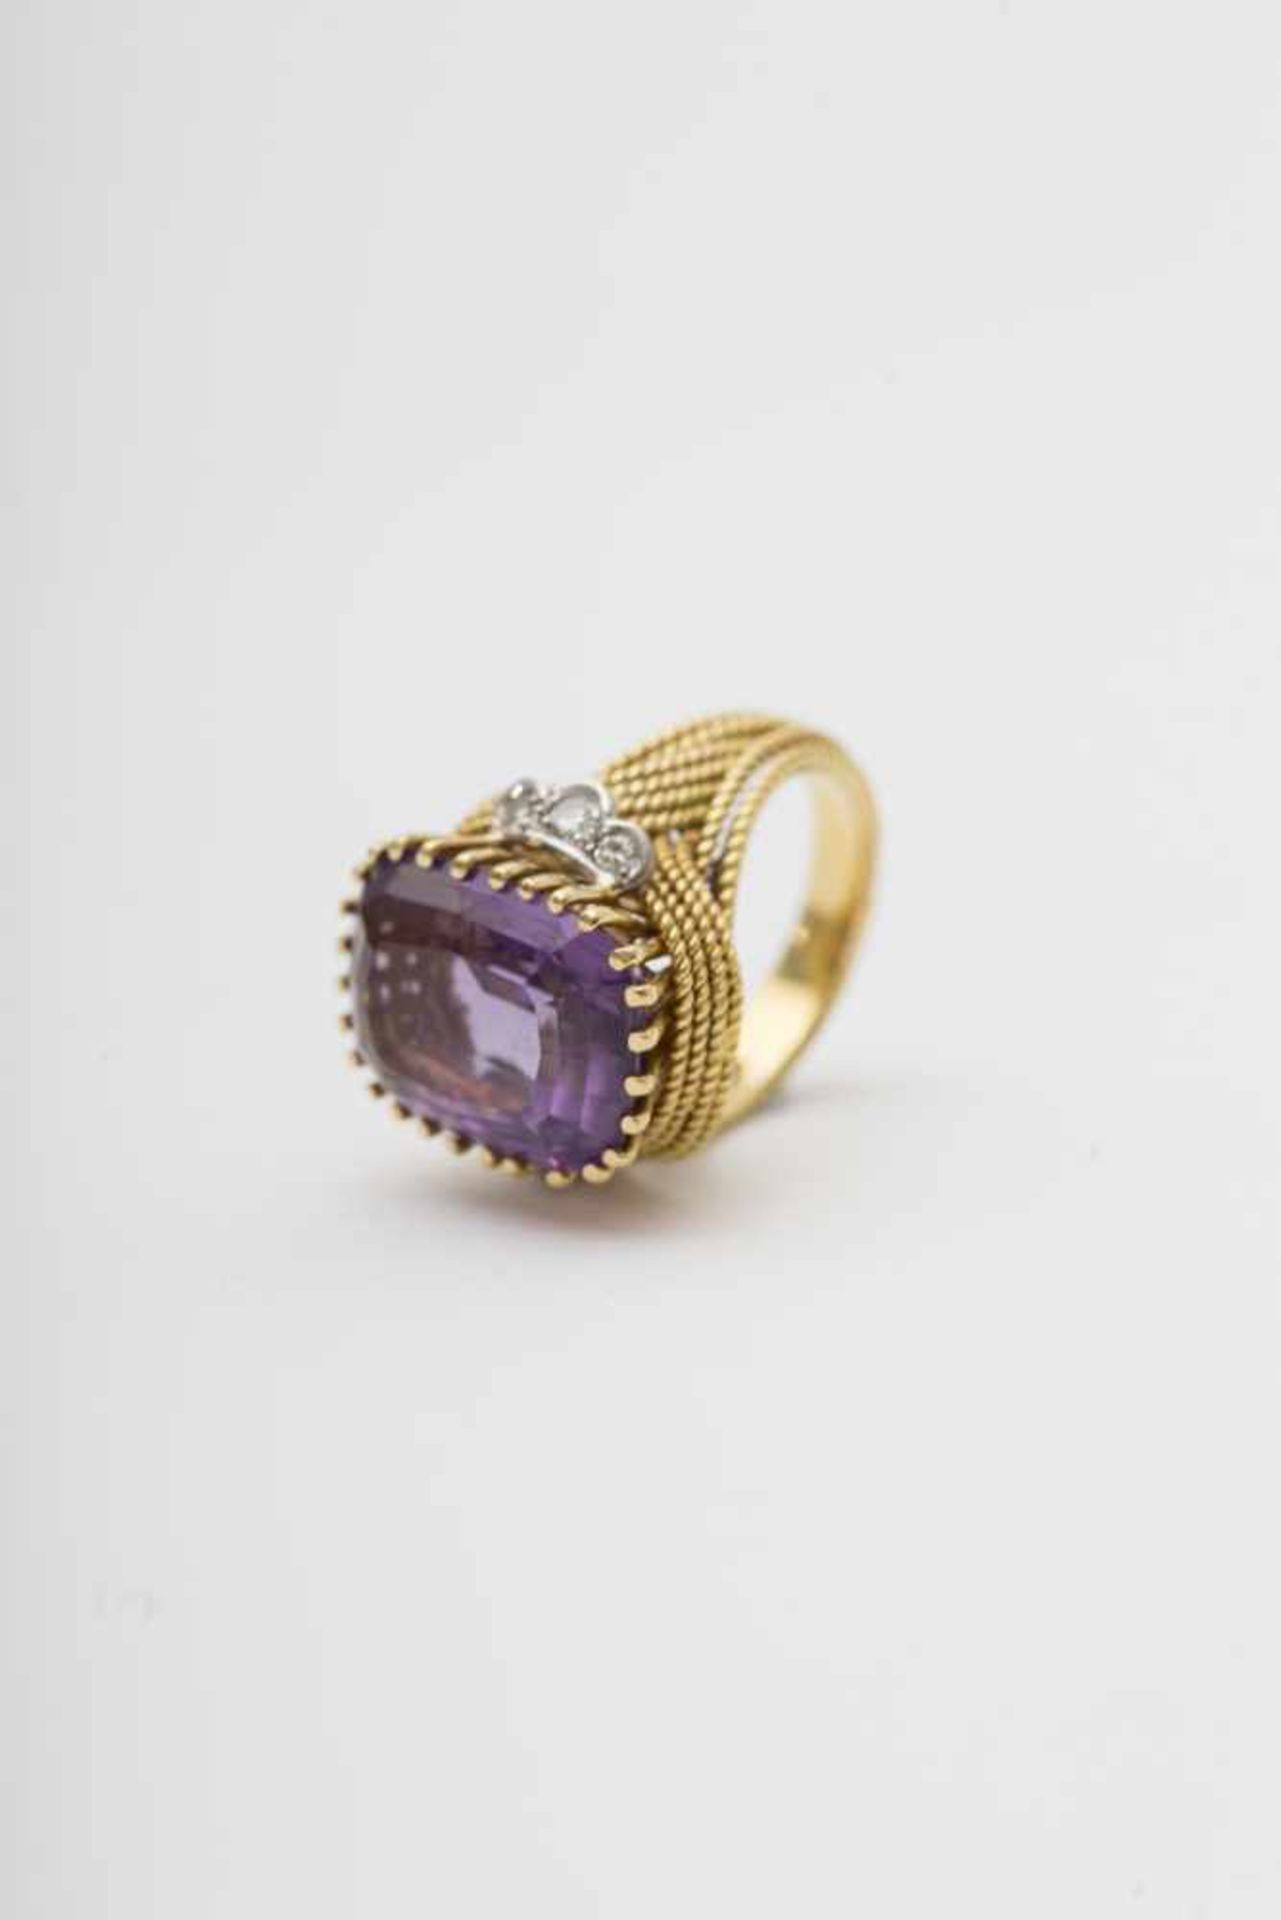 Beheyt Frères Cocktail ring Twisted 18 ct yellow gold ropes, set with an amethyst surrounded by 6 - Image 3 of 3